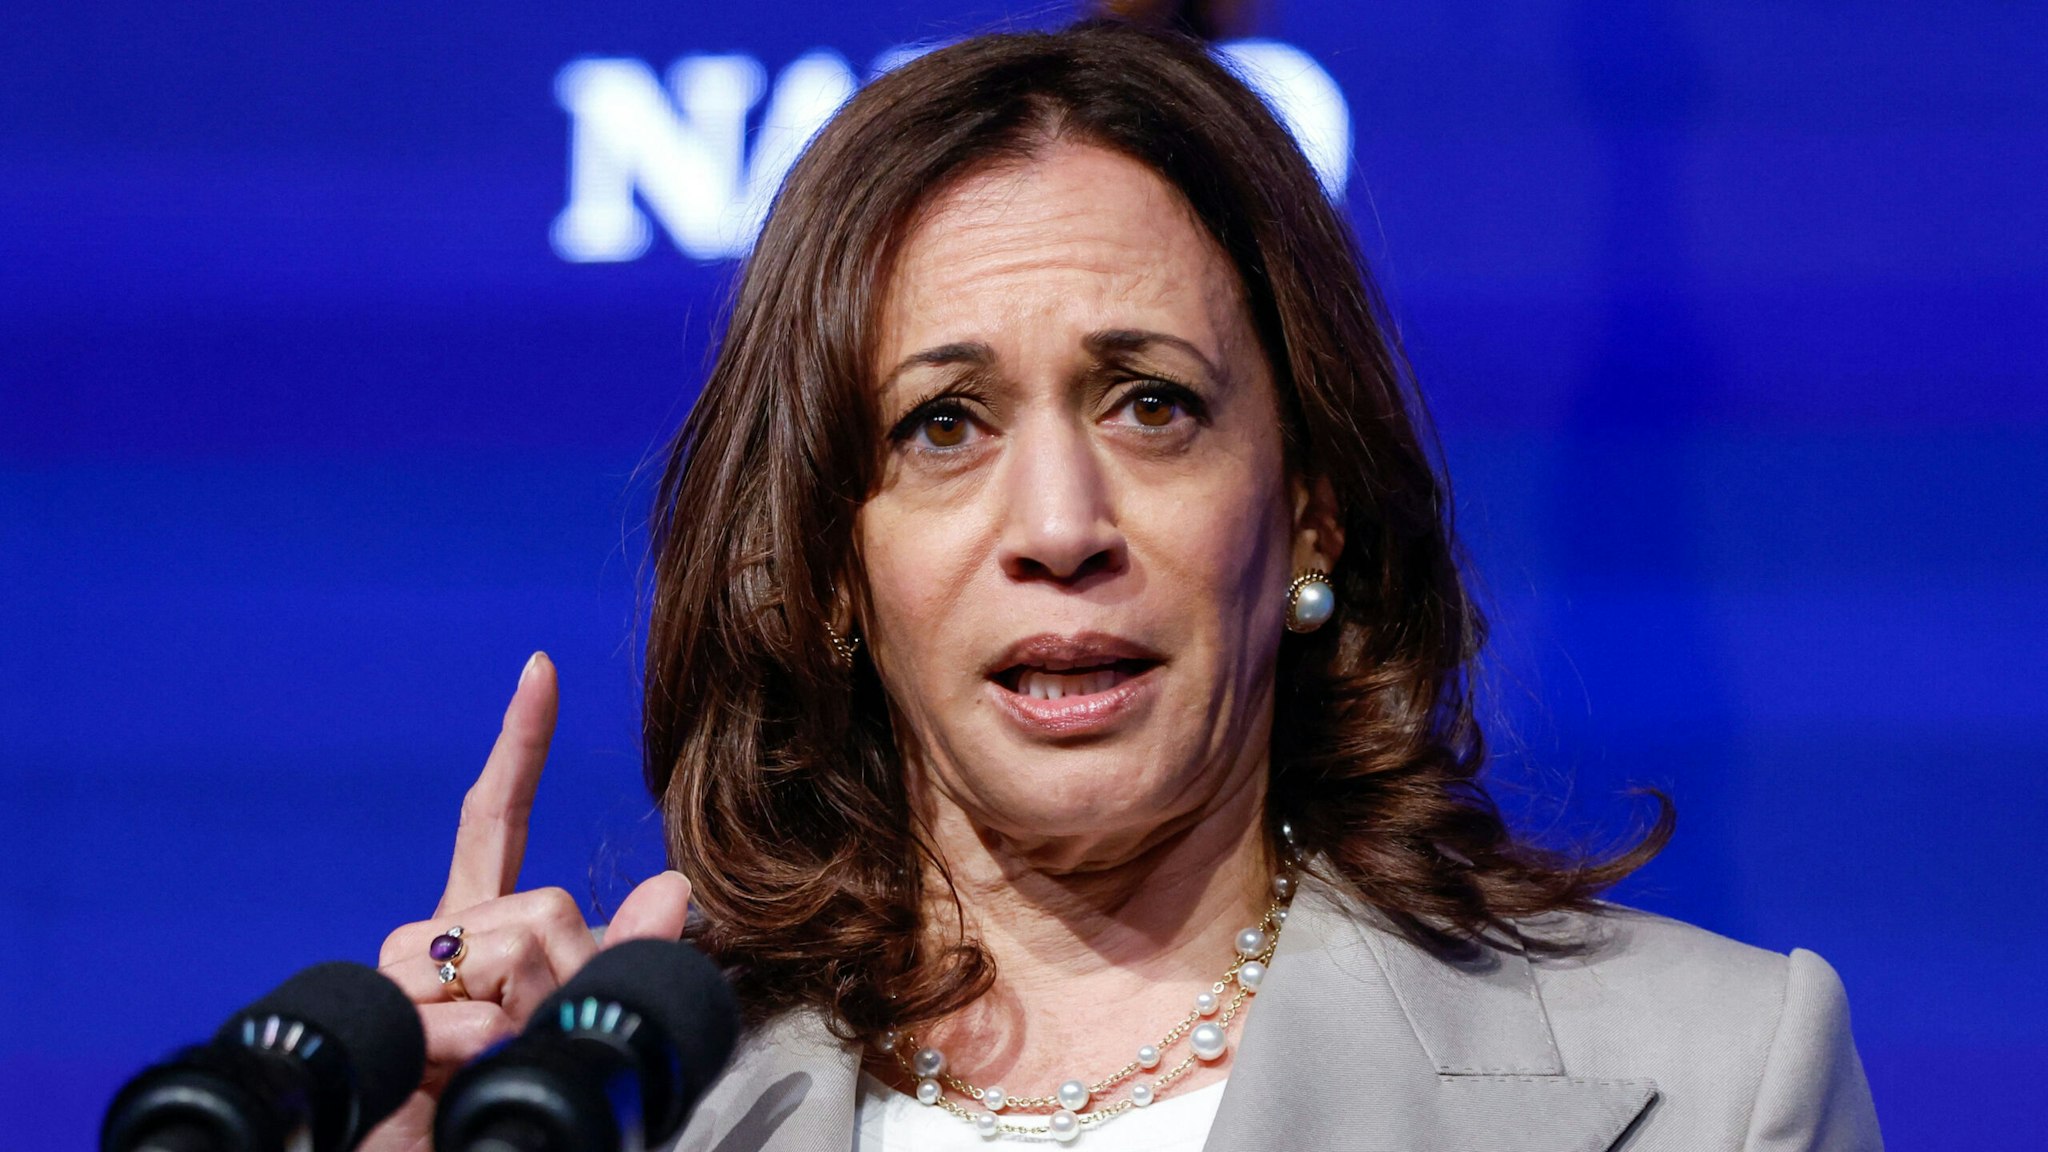 US Vice President Kamala Harris speaks at National Association of Latino Elected and Appointed Officials (NALEO) at Swissotel in Chicago, Illinois, on June 24, 2022.